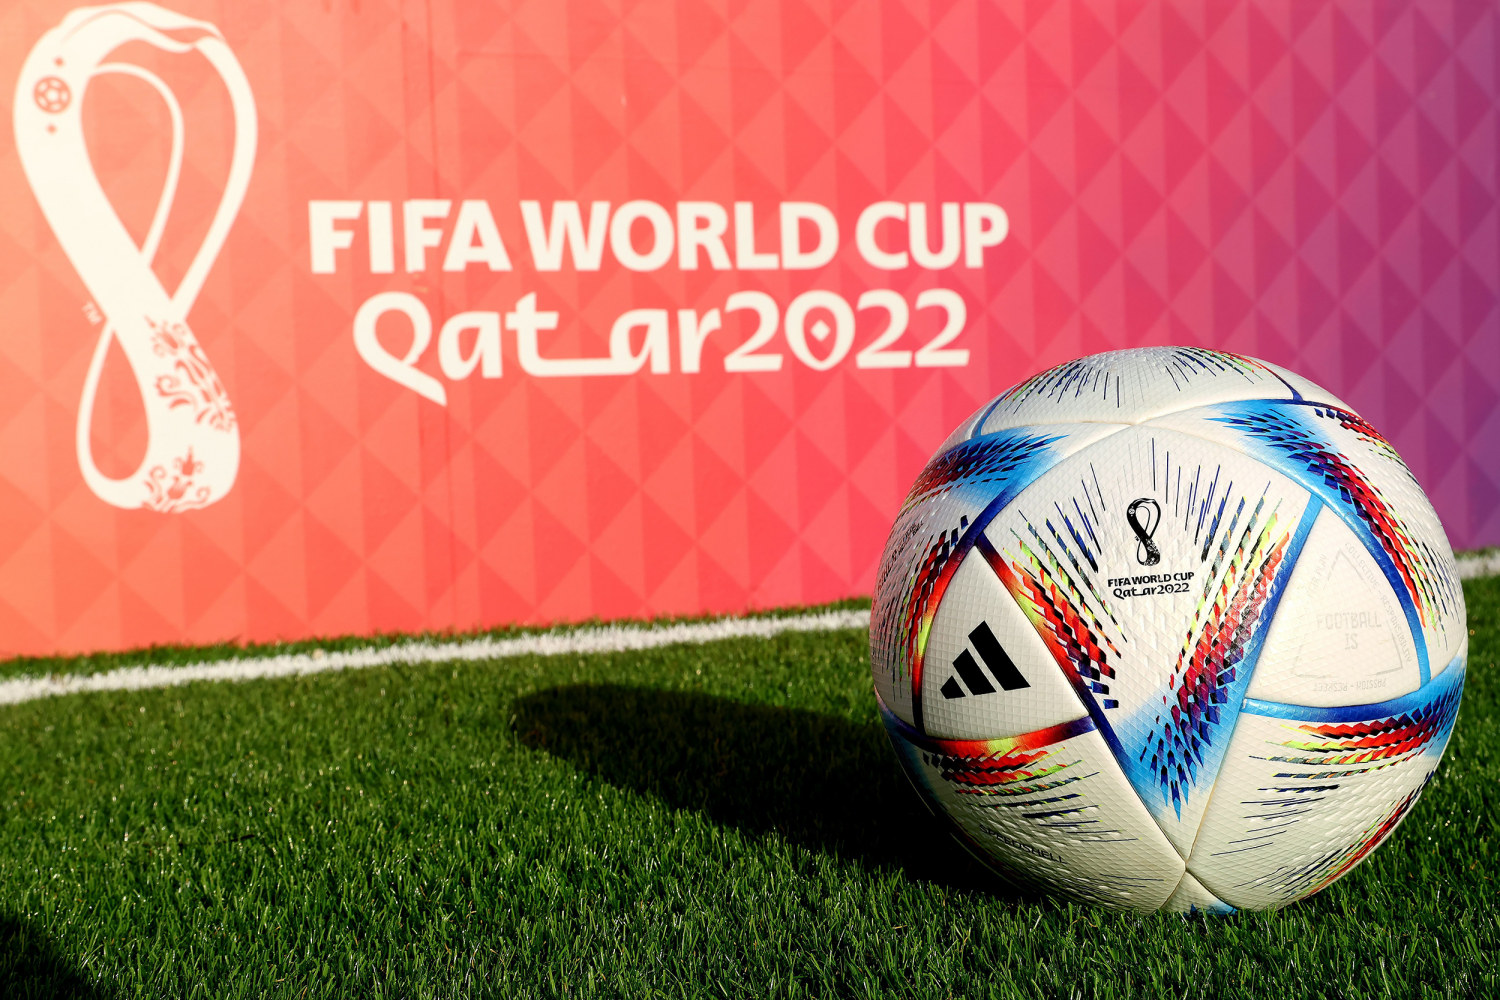 website to watch fifa world cup 2022